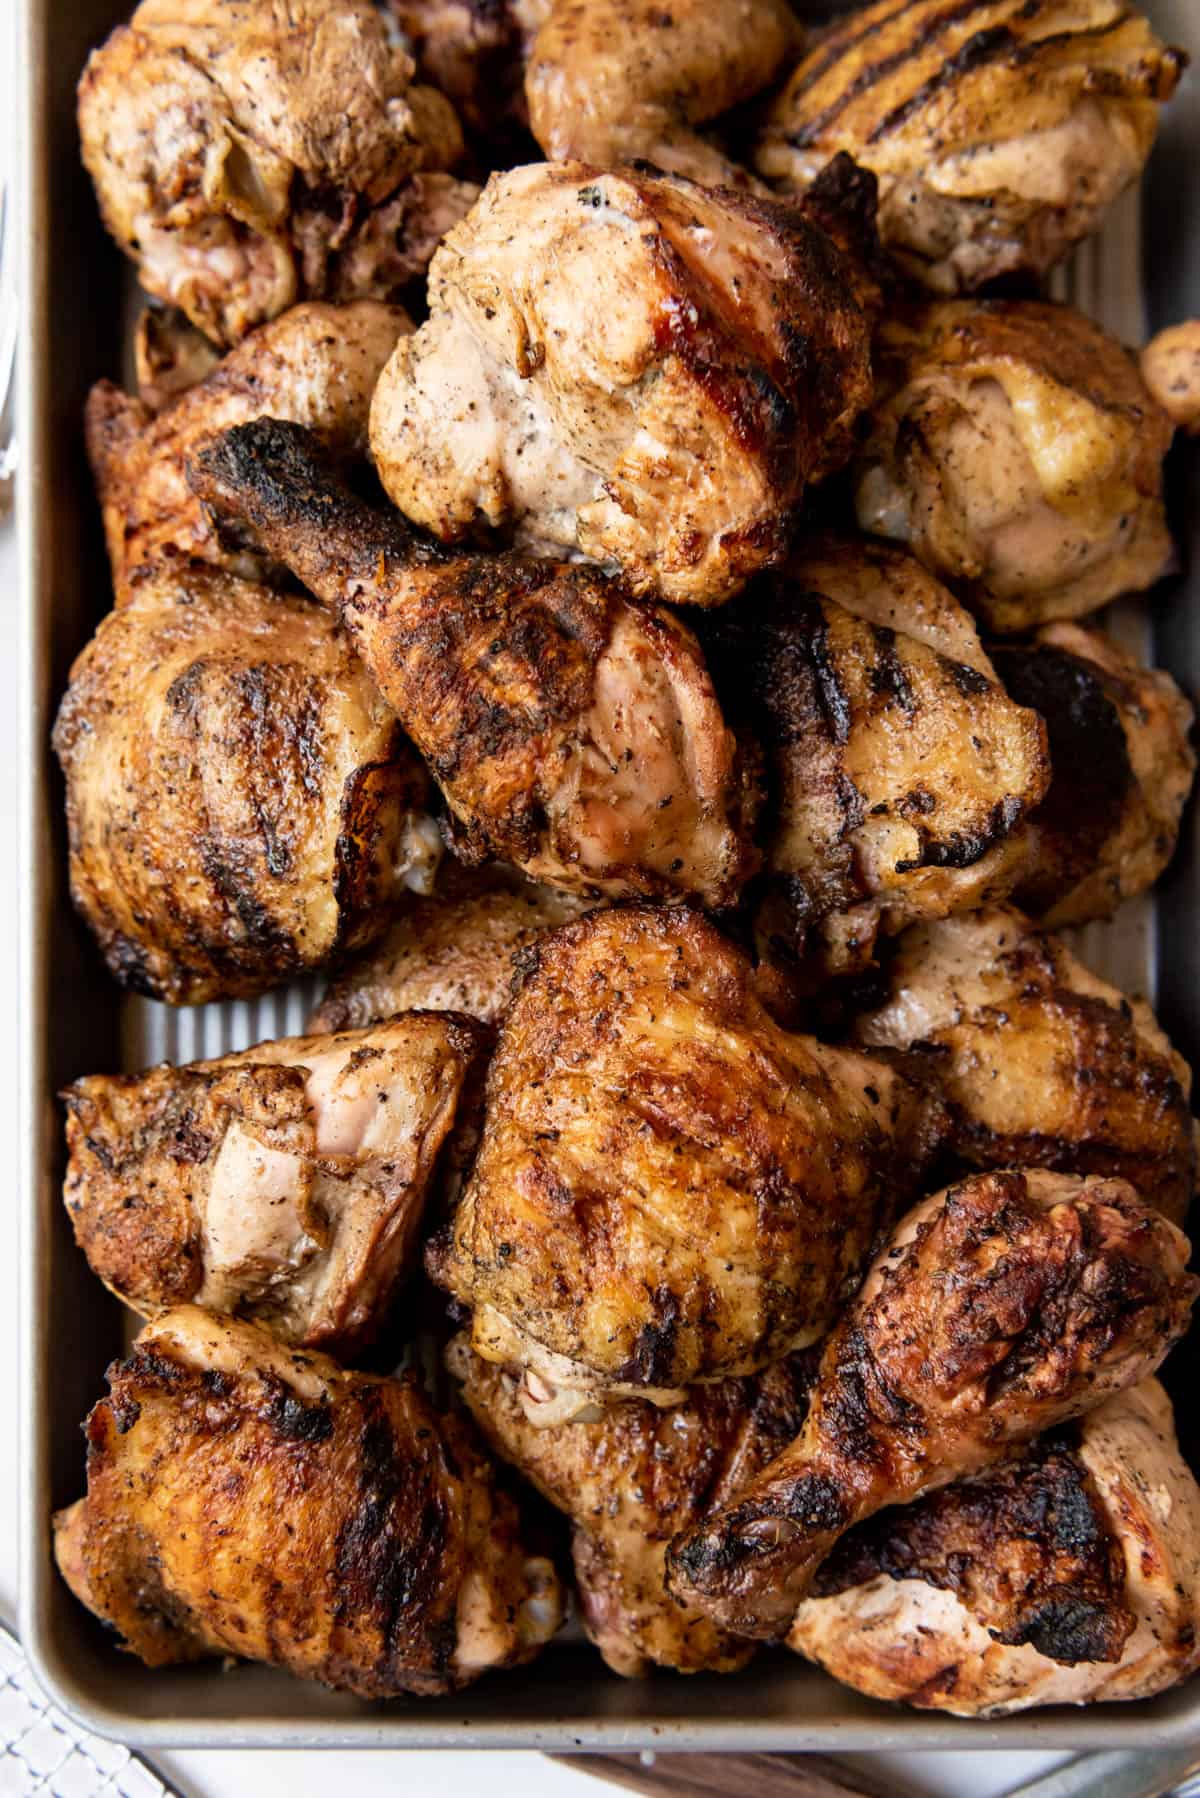 Pieces of grilled fireman's chicken piled on a baking sheet.